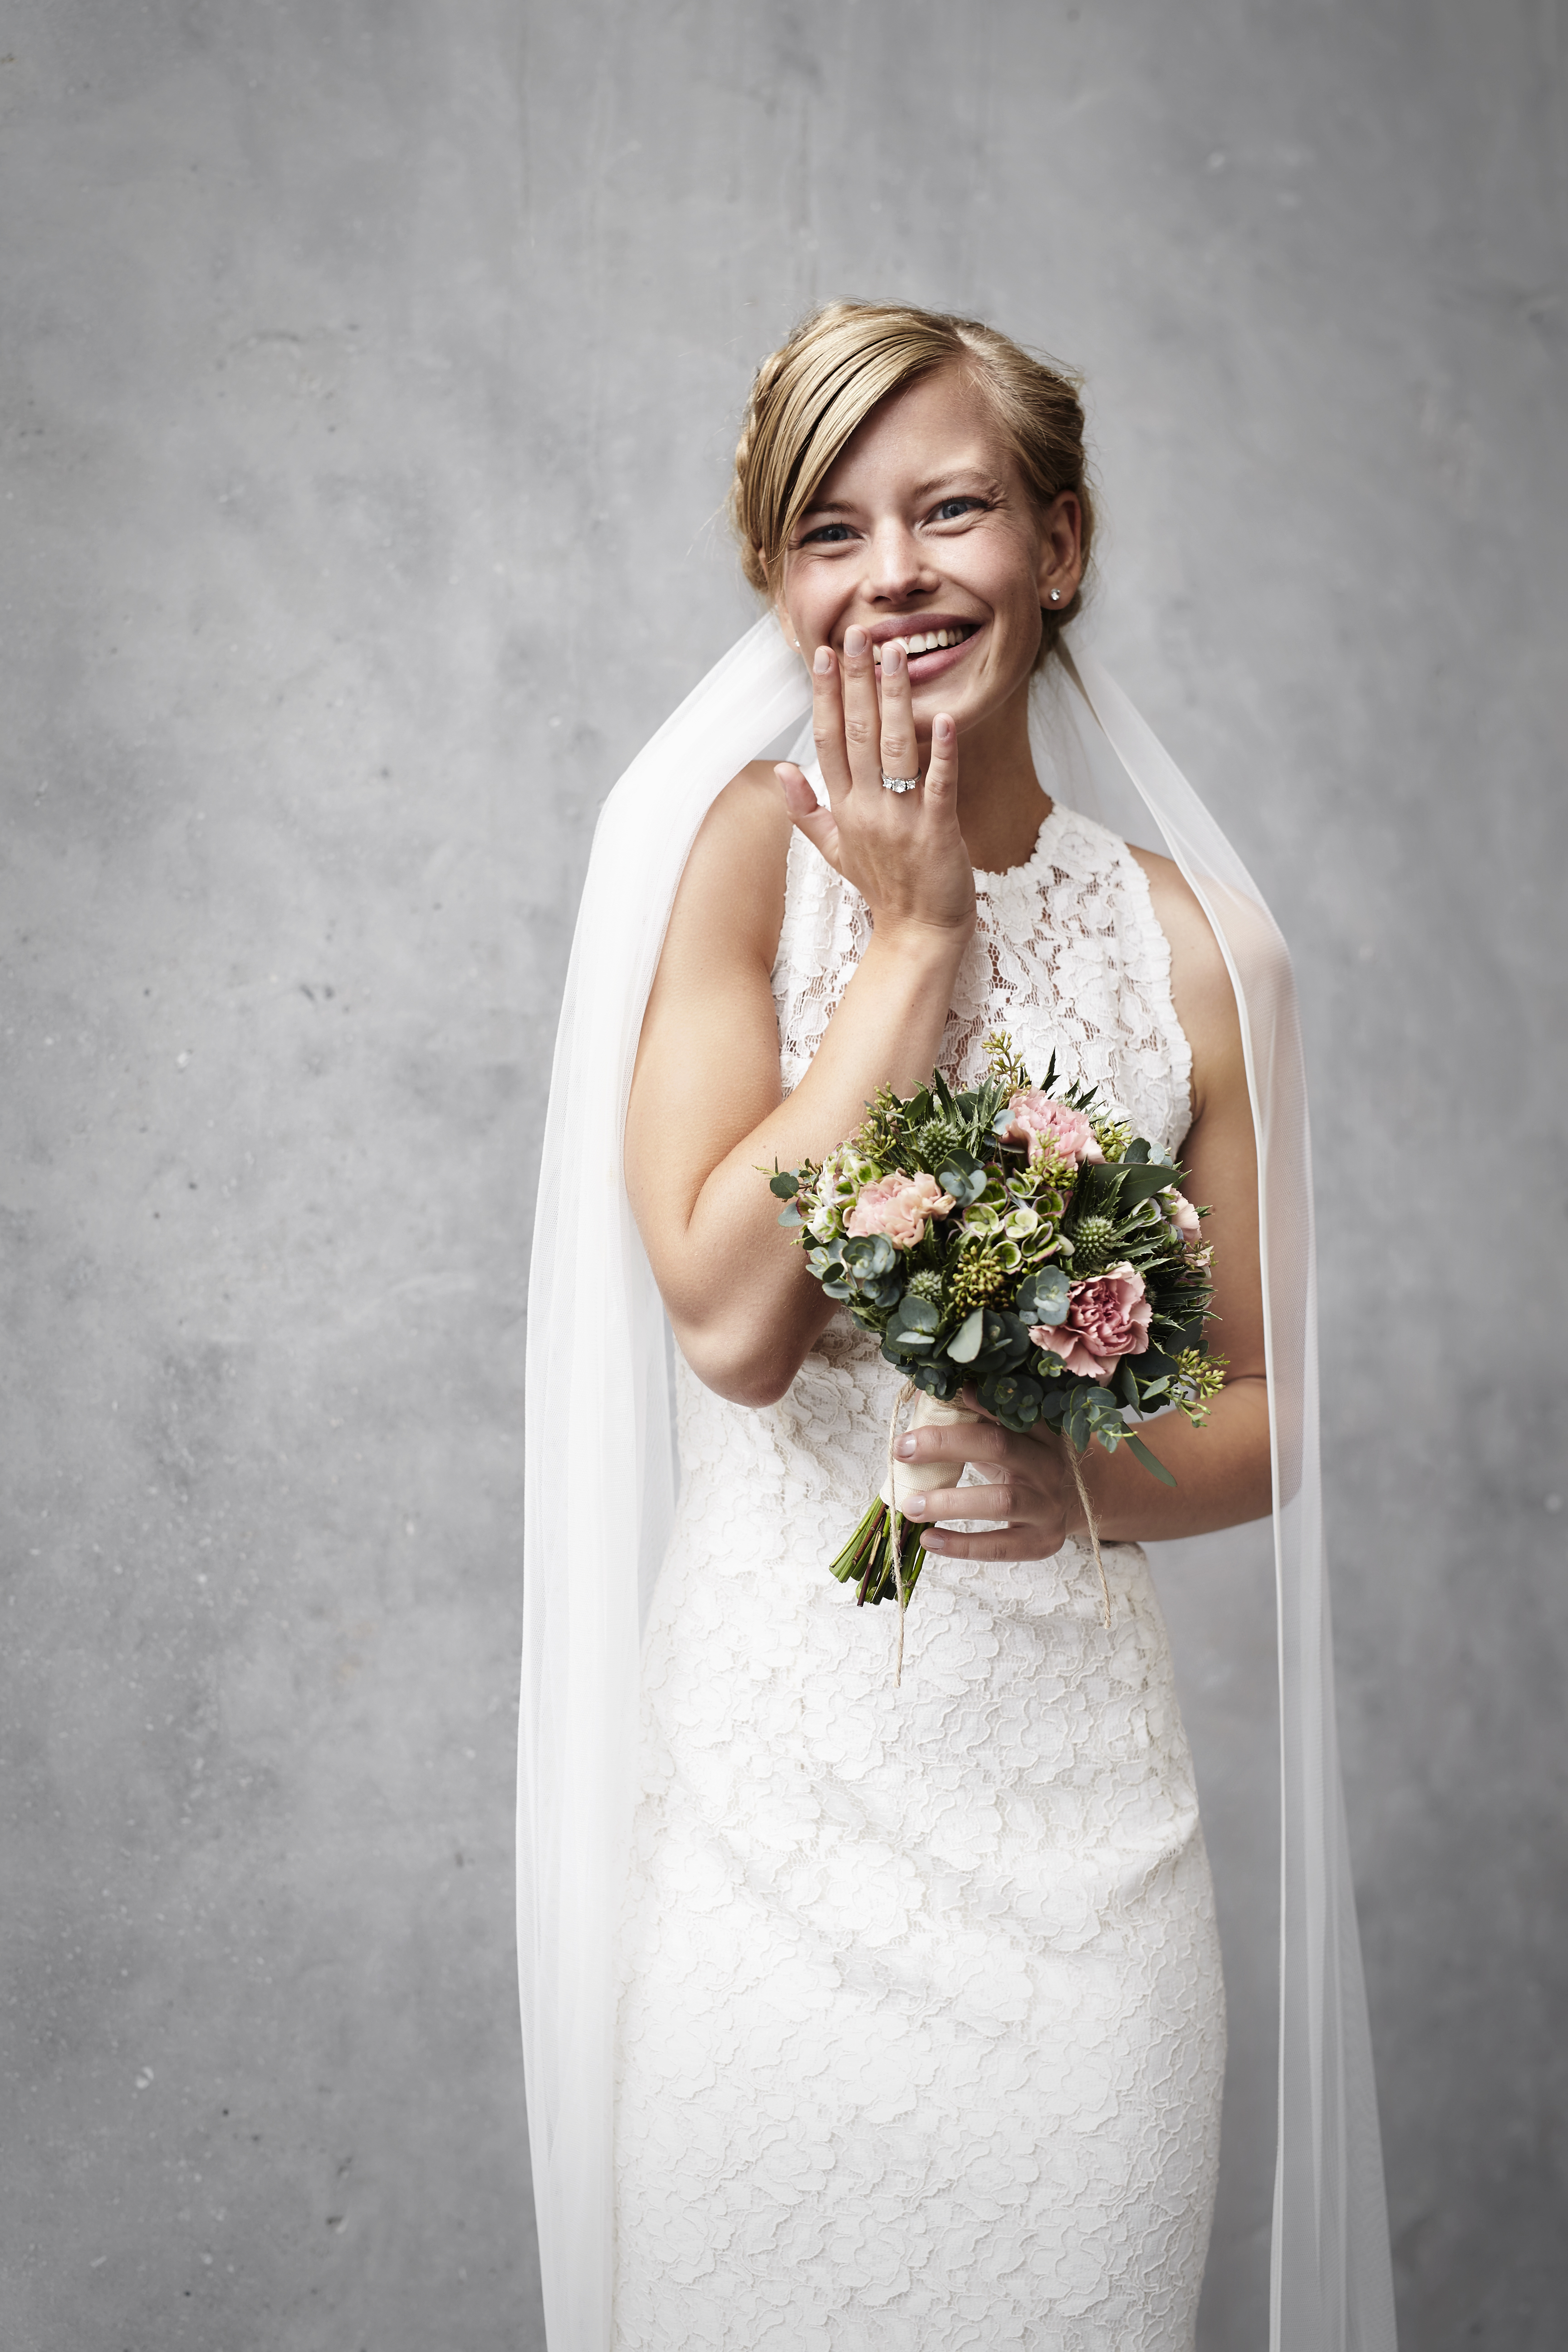 A bride giggling as she holds her bouquet | Source: Shutterstock